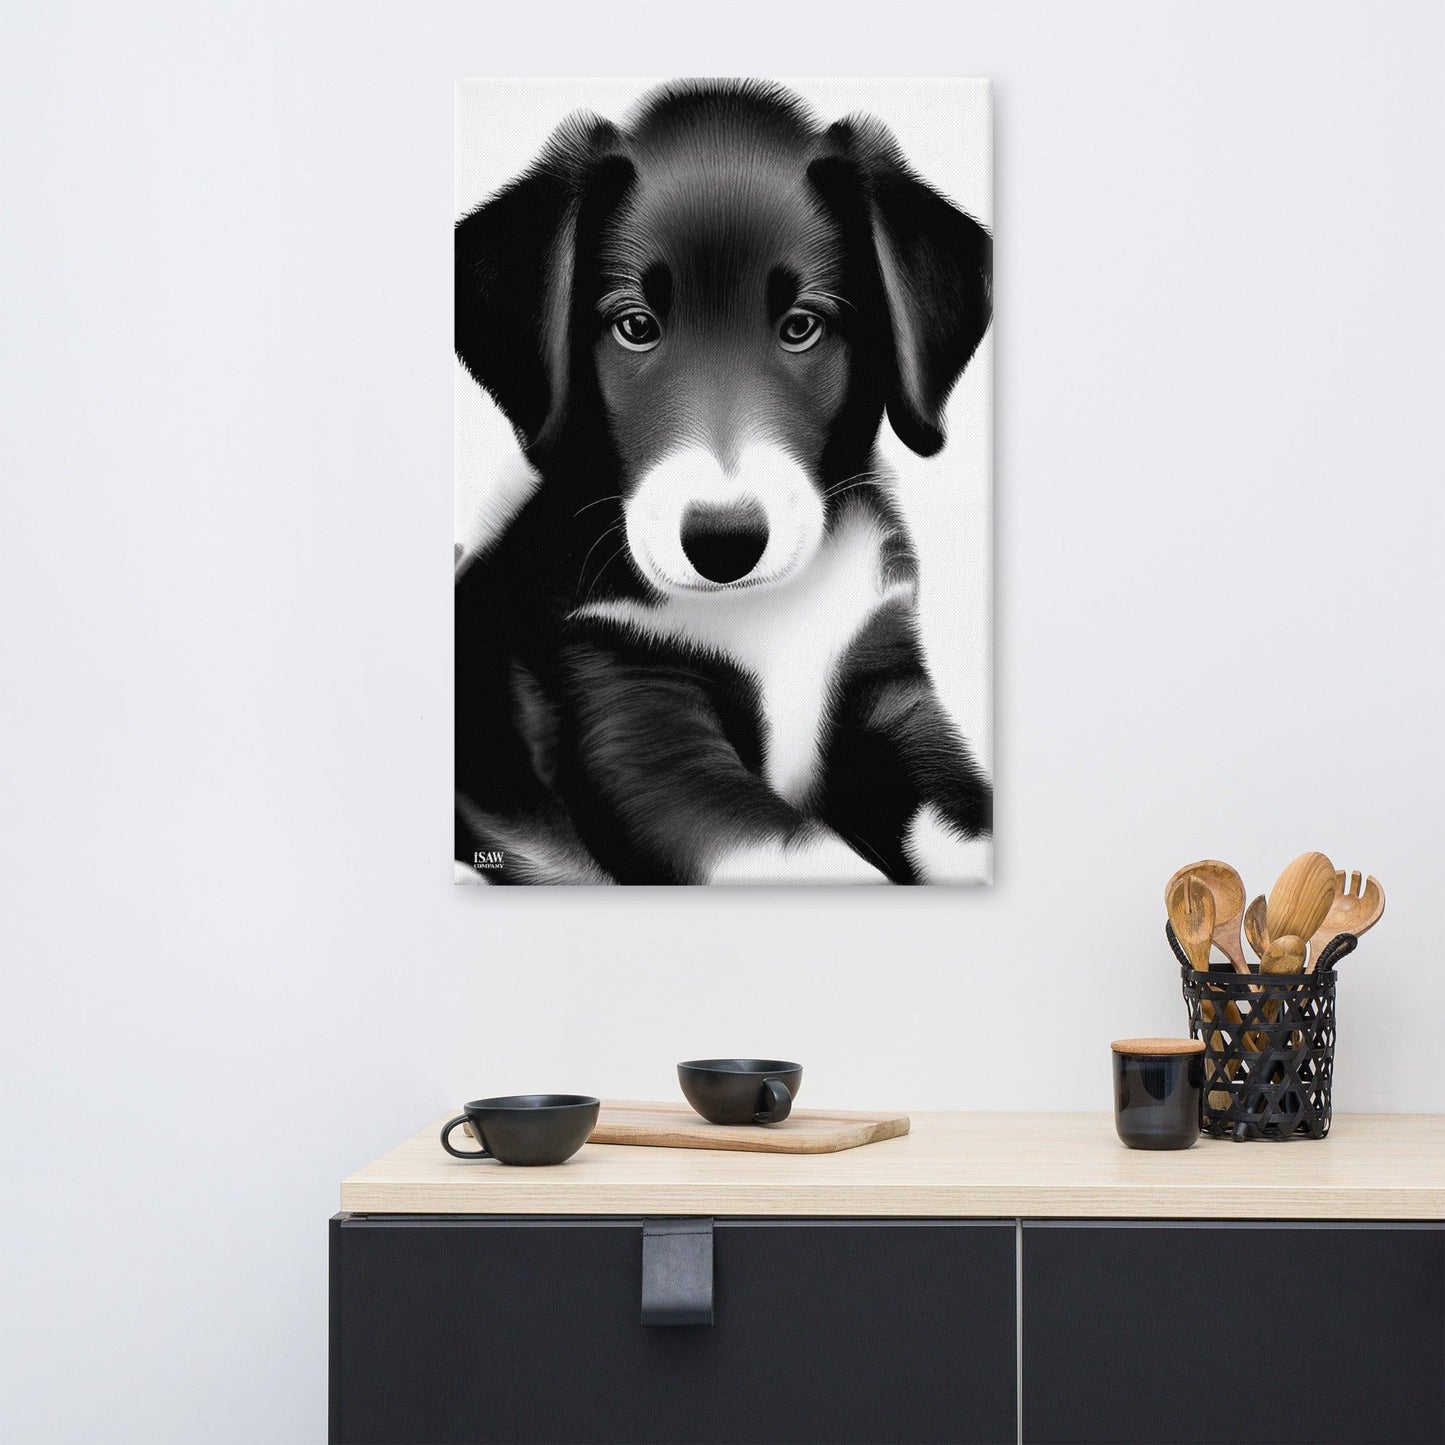 Puppy Love 6 - Canvas Print - iSAW Company